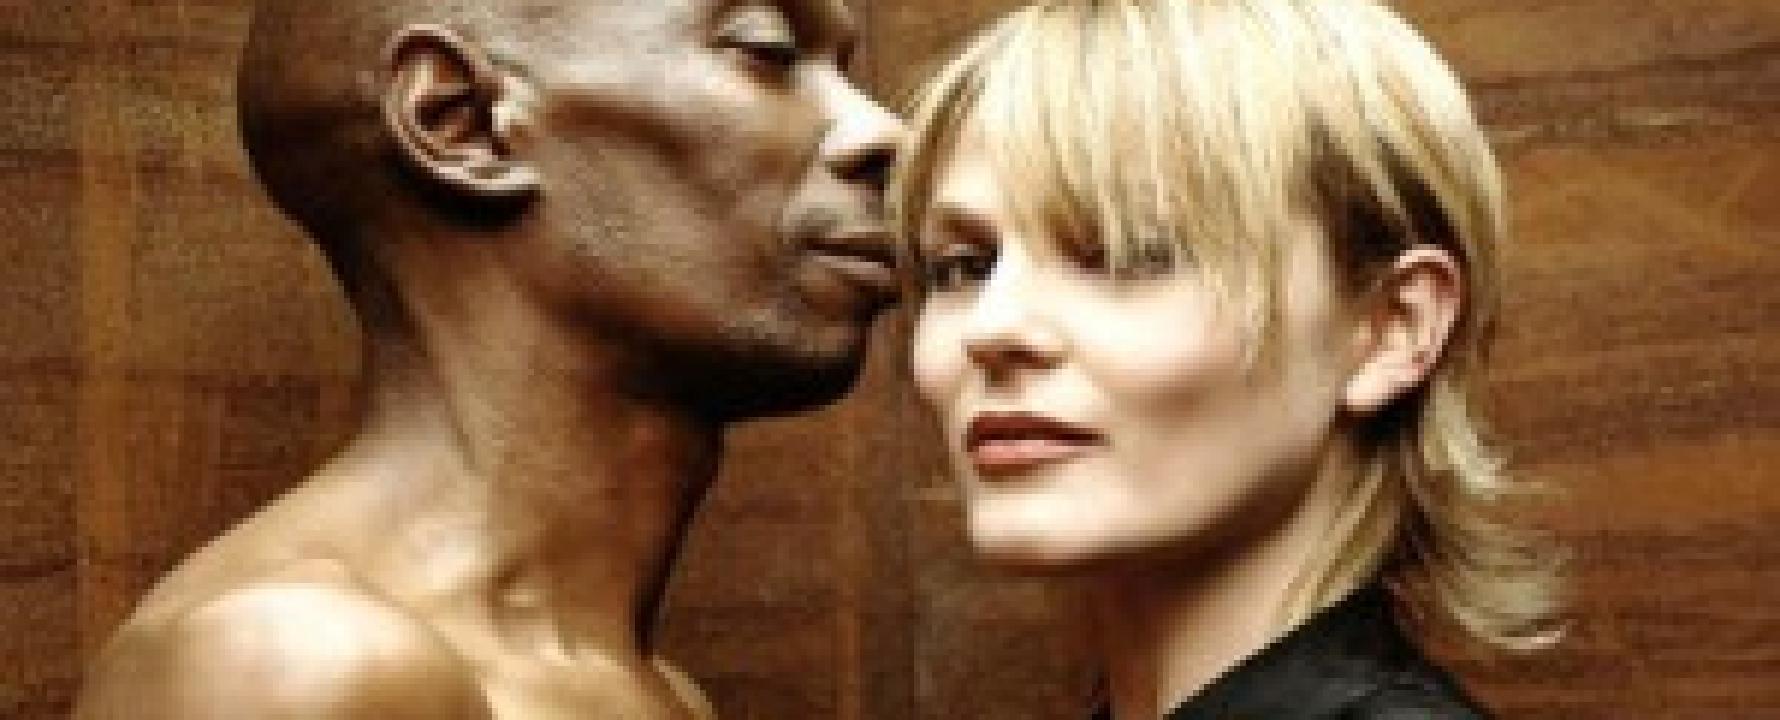 Promotional photograph of Faithless.